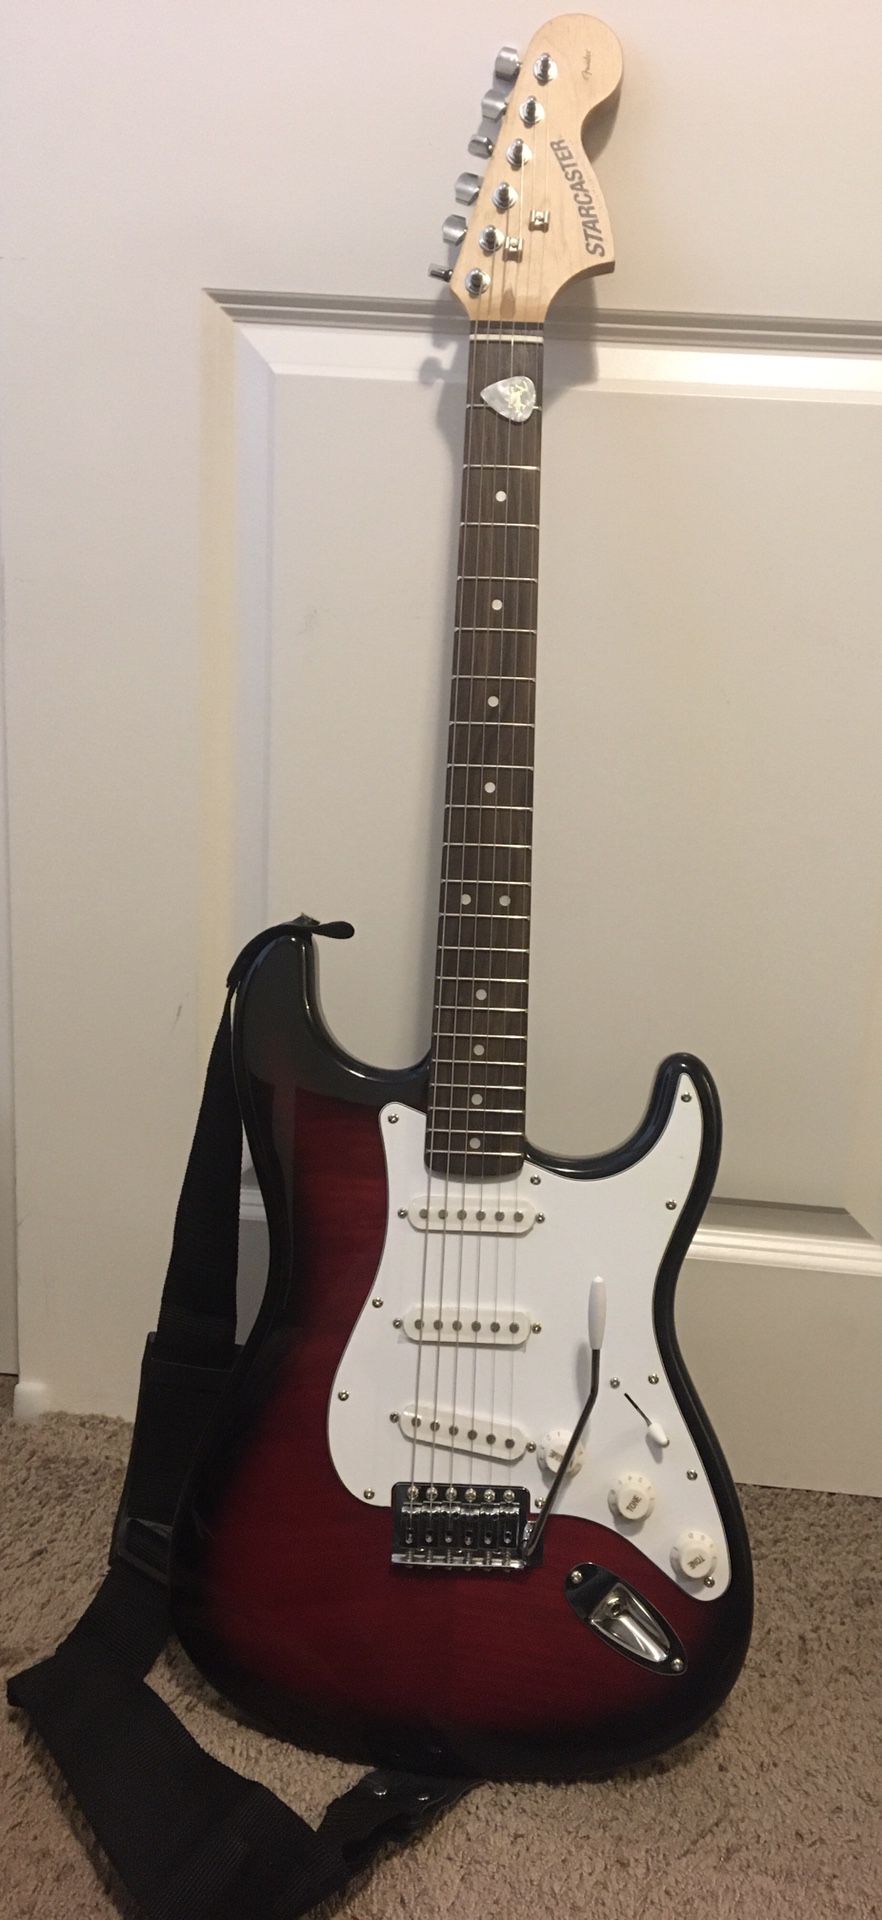 Starcaster Electric Guitar by Fender